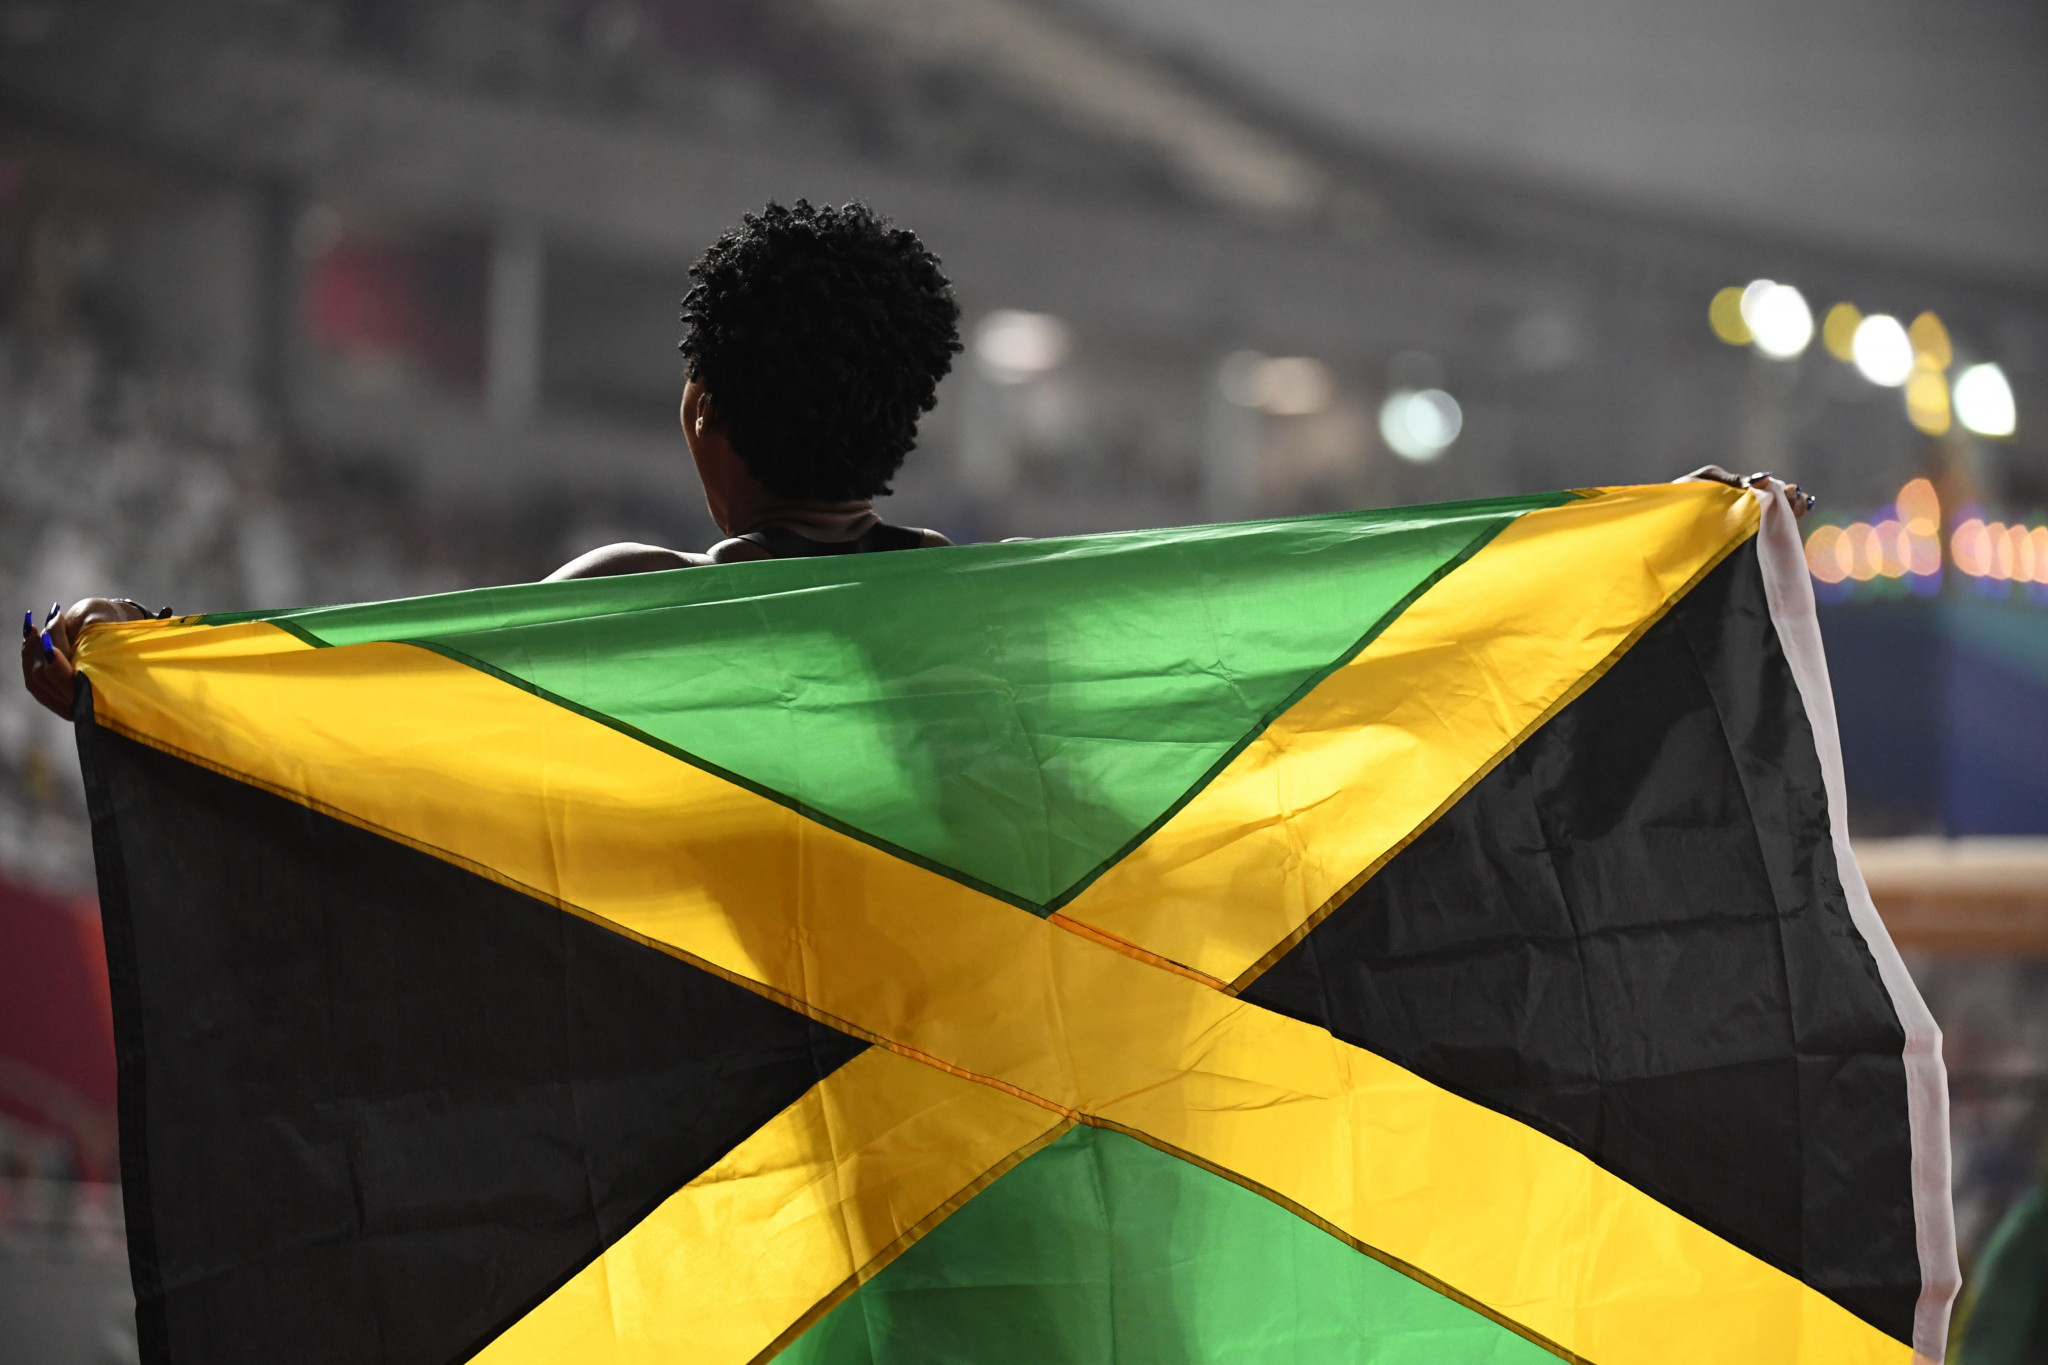 Jamaica to hold Tokyo 2020 training camps in Tottori